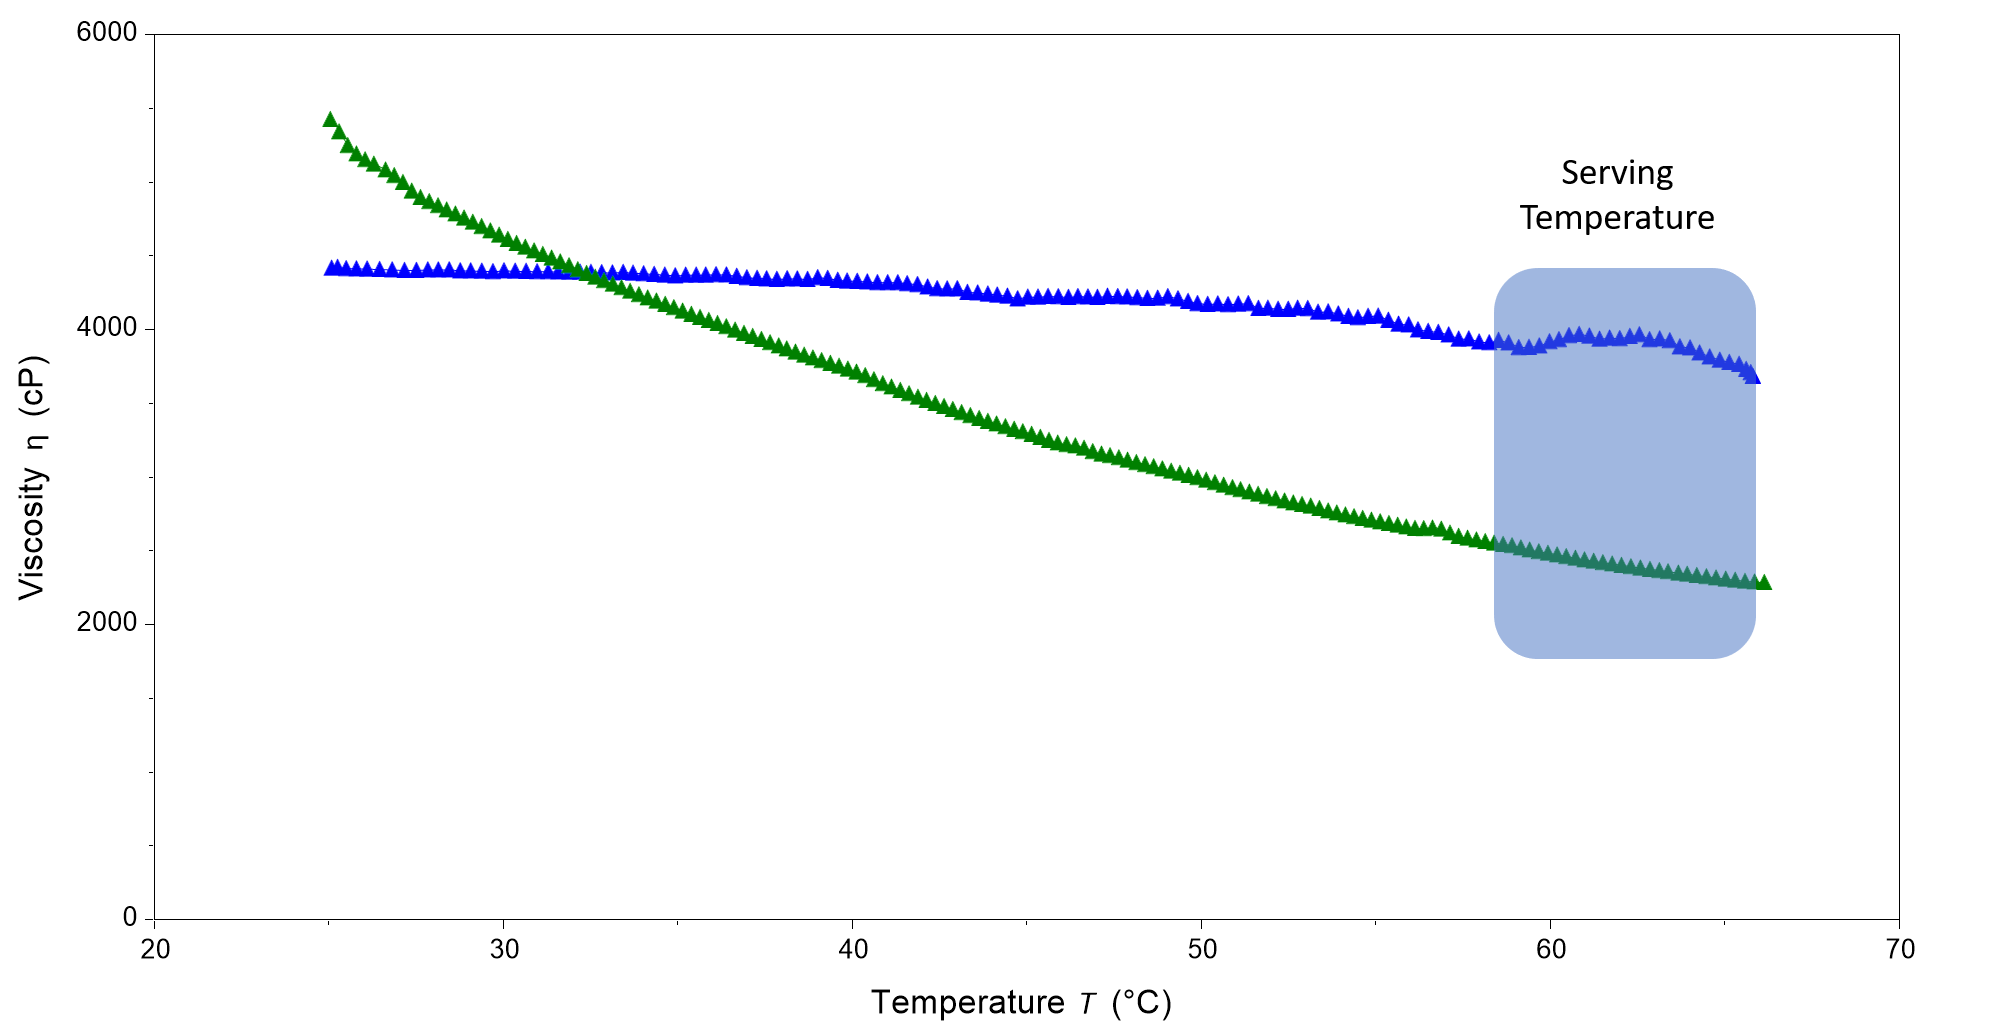 Figure 2: Flow sweep of canned gravy (blue) and premium gravy (green). Testing was done at 65 °C